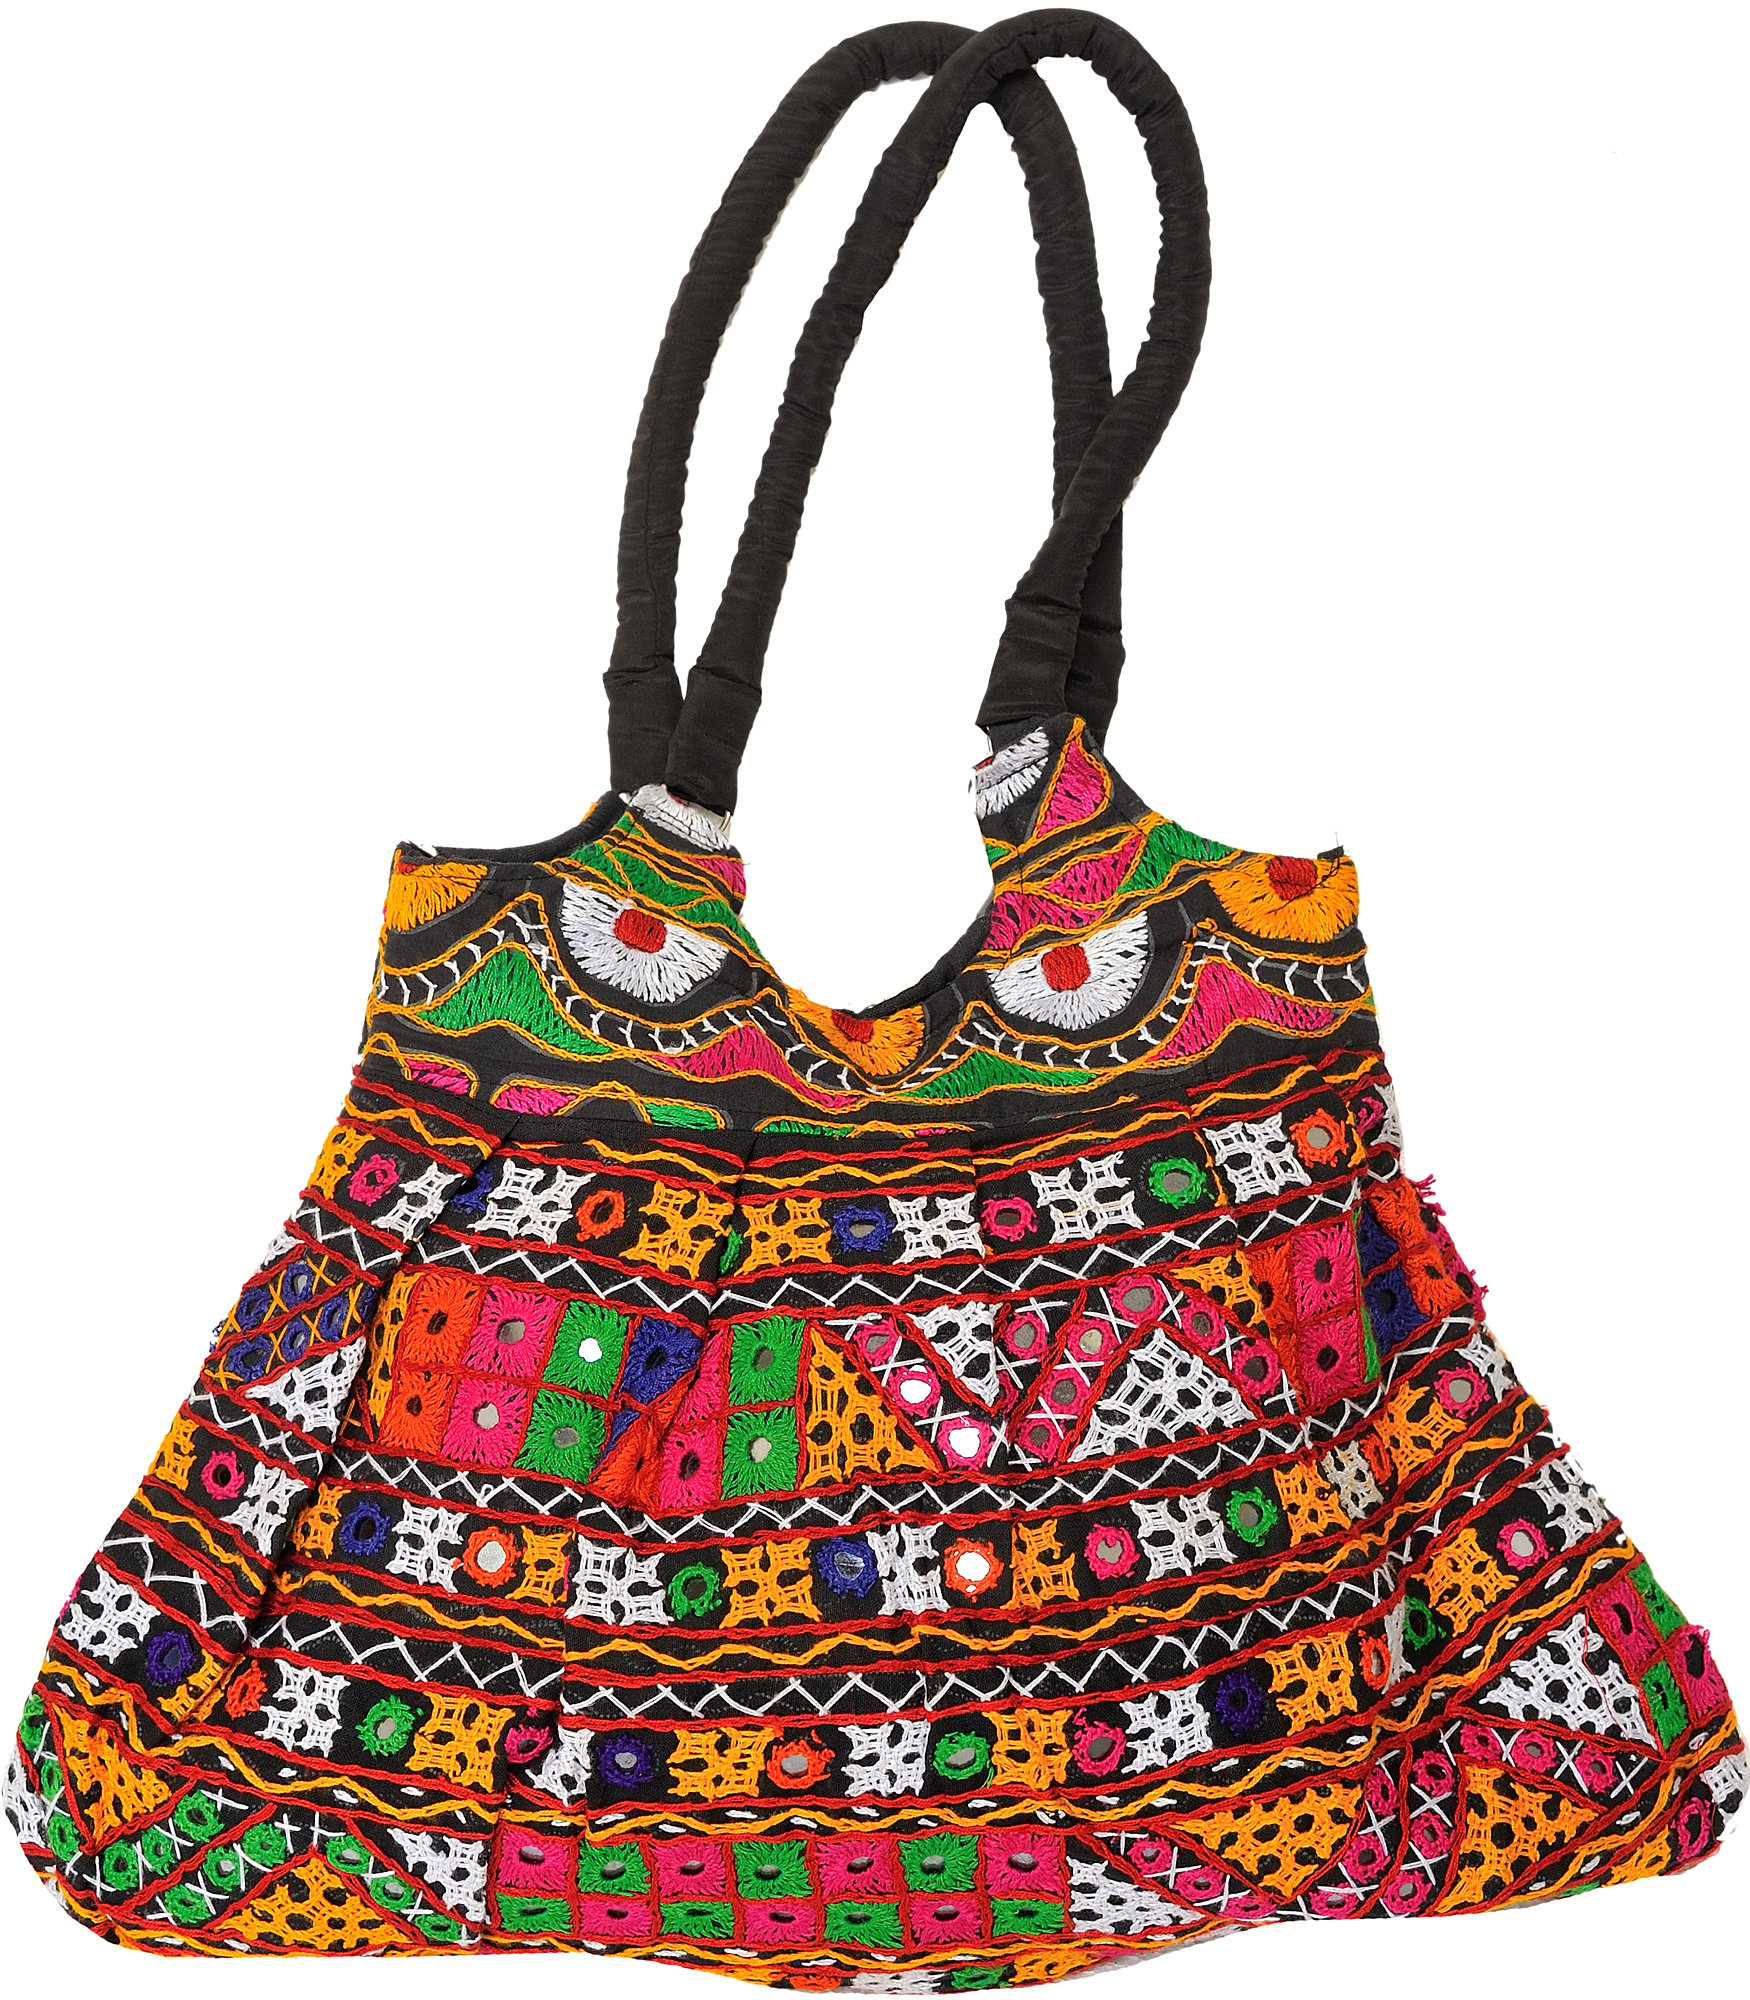 Buy Colourful Fabric Jhola & Hobo Bags From Bag Lo | LBB